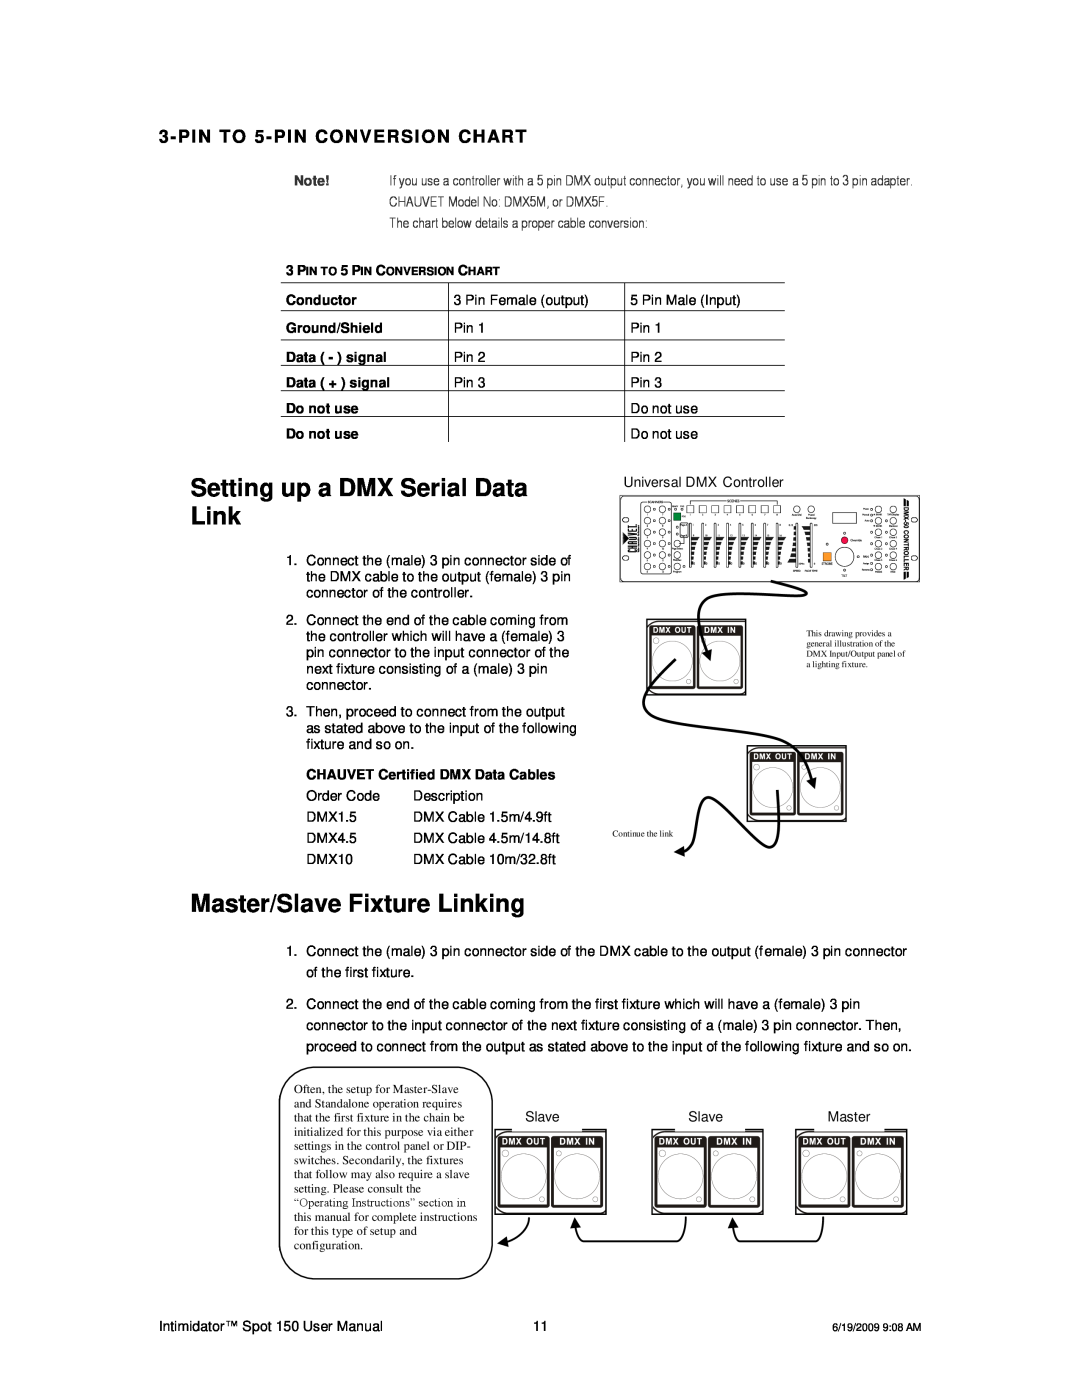 Chauvet 150 user manual Setting up a DMX Serial Data Link, Master/Slave Fixture Linking, PIN TO 5- PIN CONVERSION CHART 